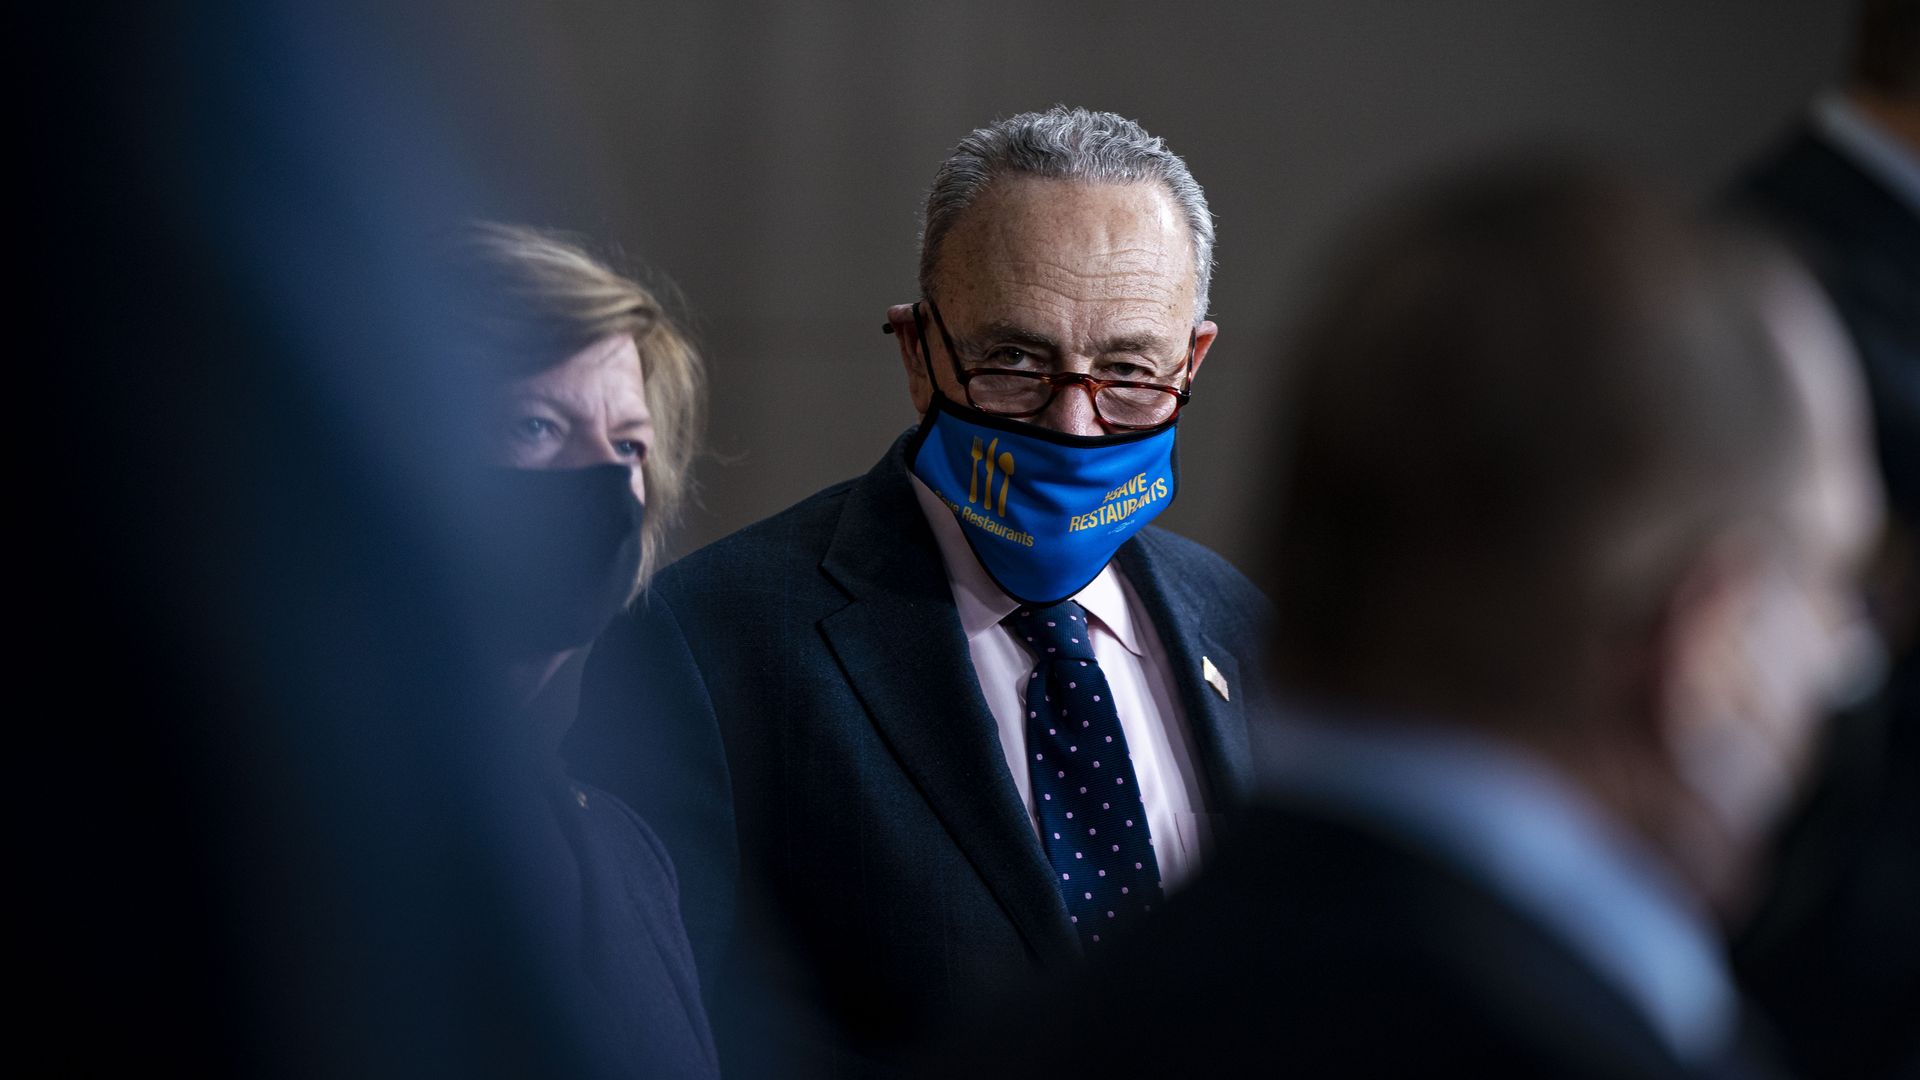 Senate Majority Leader Chuck Schumer is seen during a news conference Thursday.